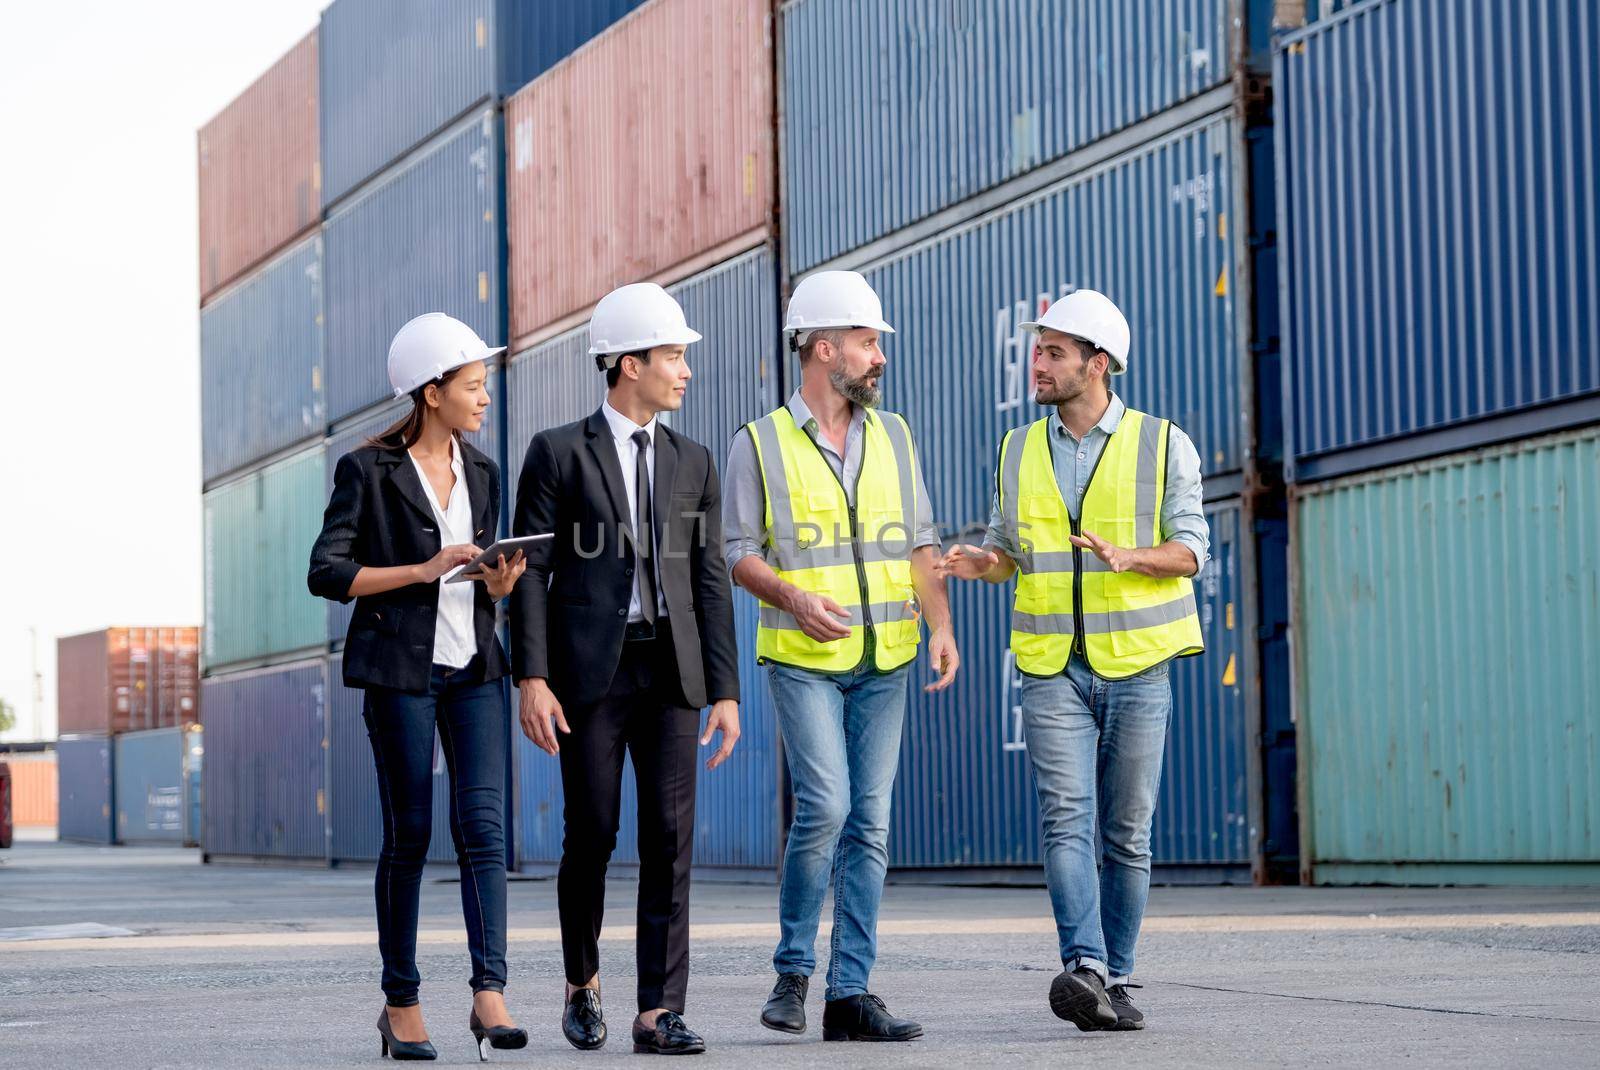 Group of cargo container workers or factory and engineer technicians walk and discuss together in workplace area. Good teamwork support best success work of industrial business concept.